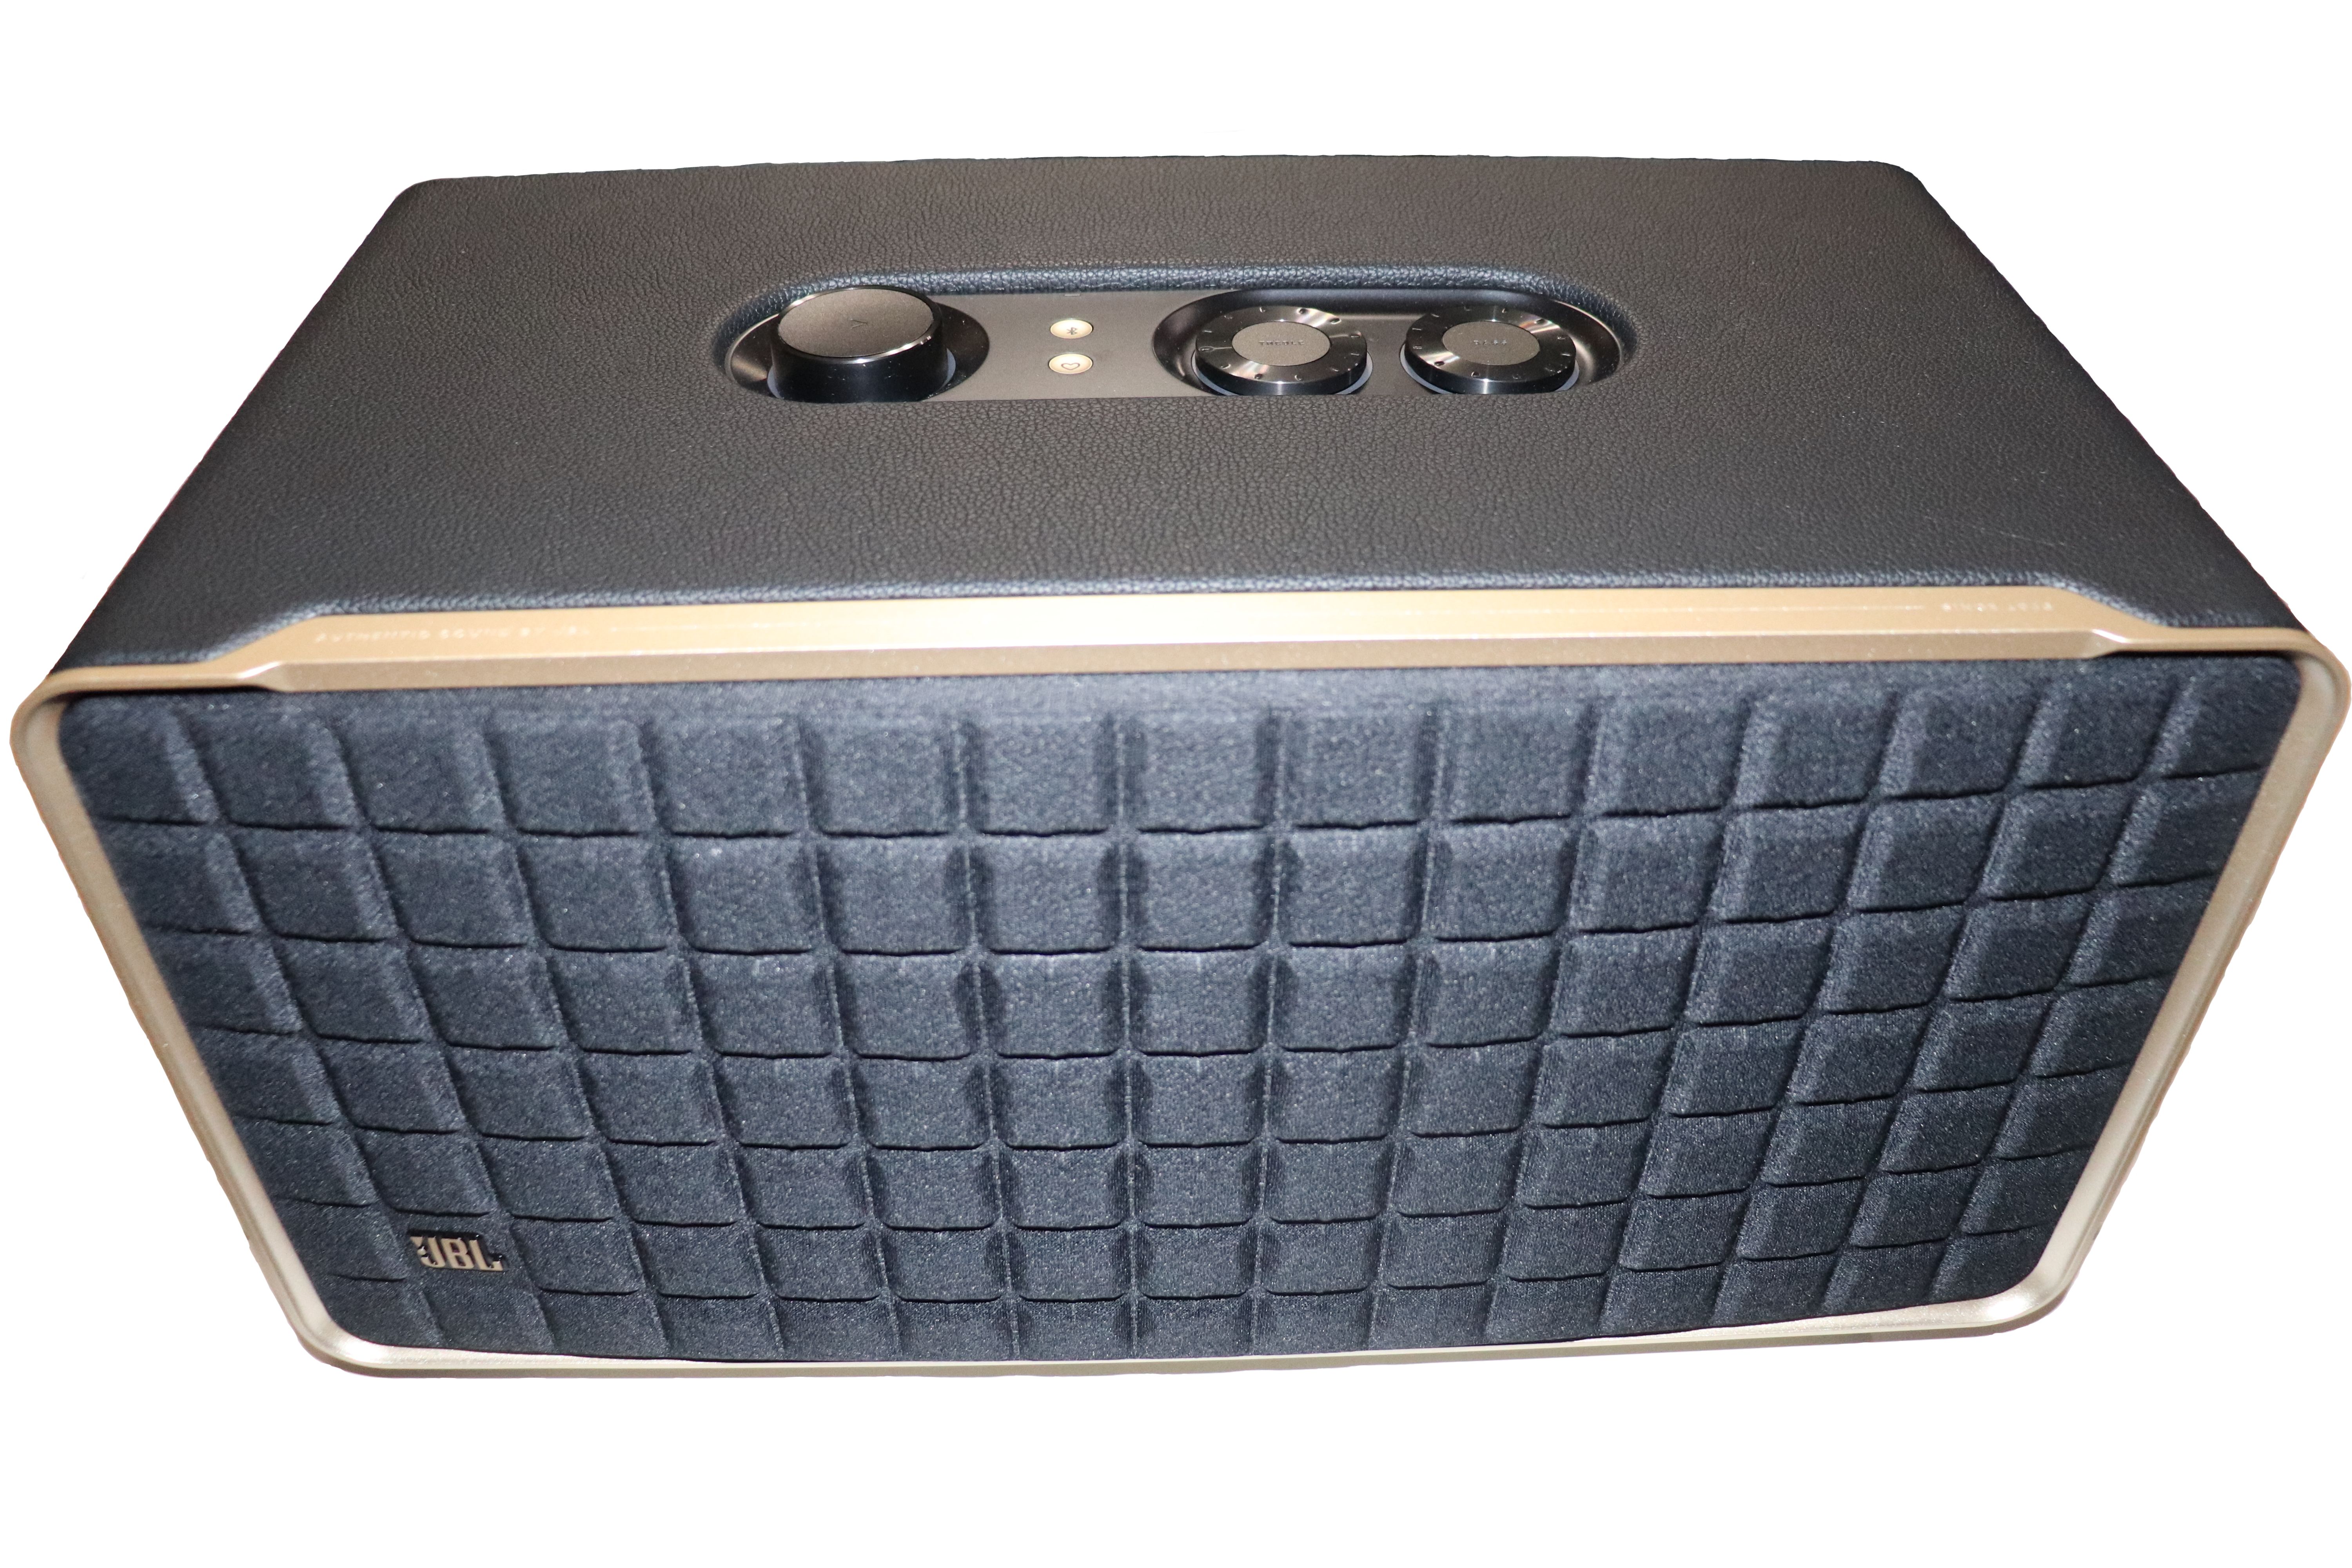 Stereowise Plus: JBL Authentics 500 Wireless Smart Speaker Review